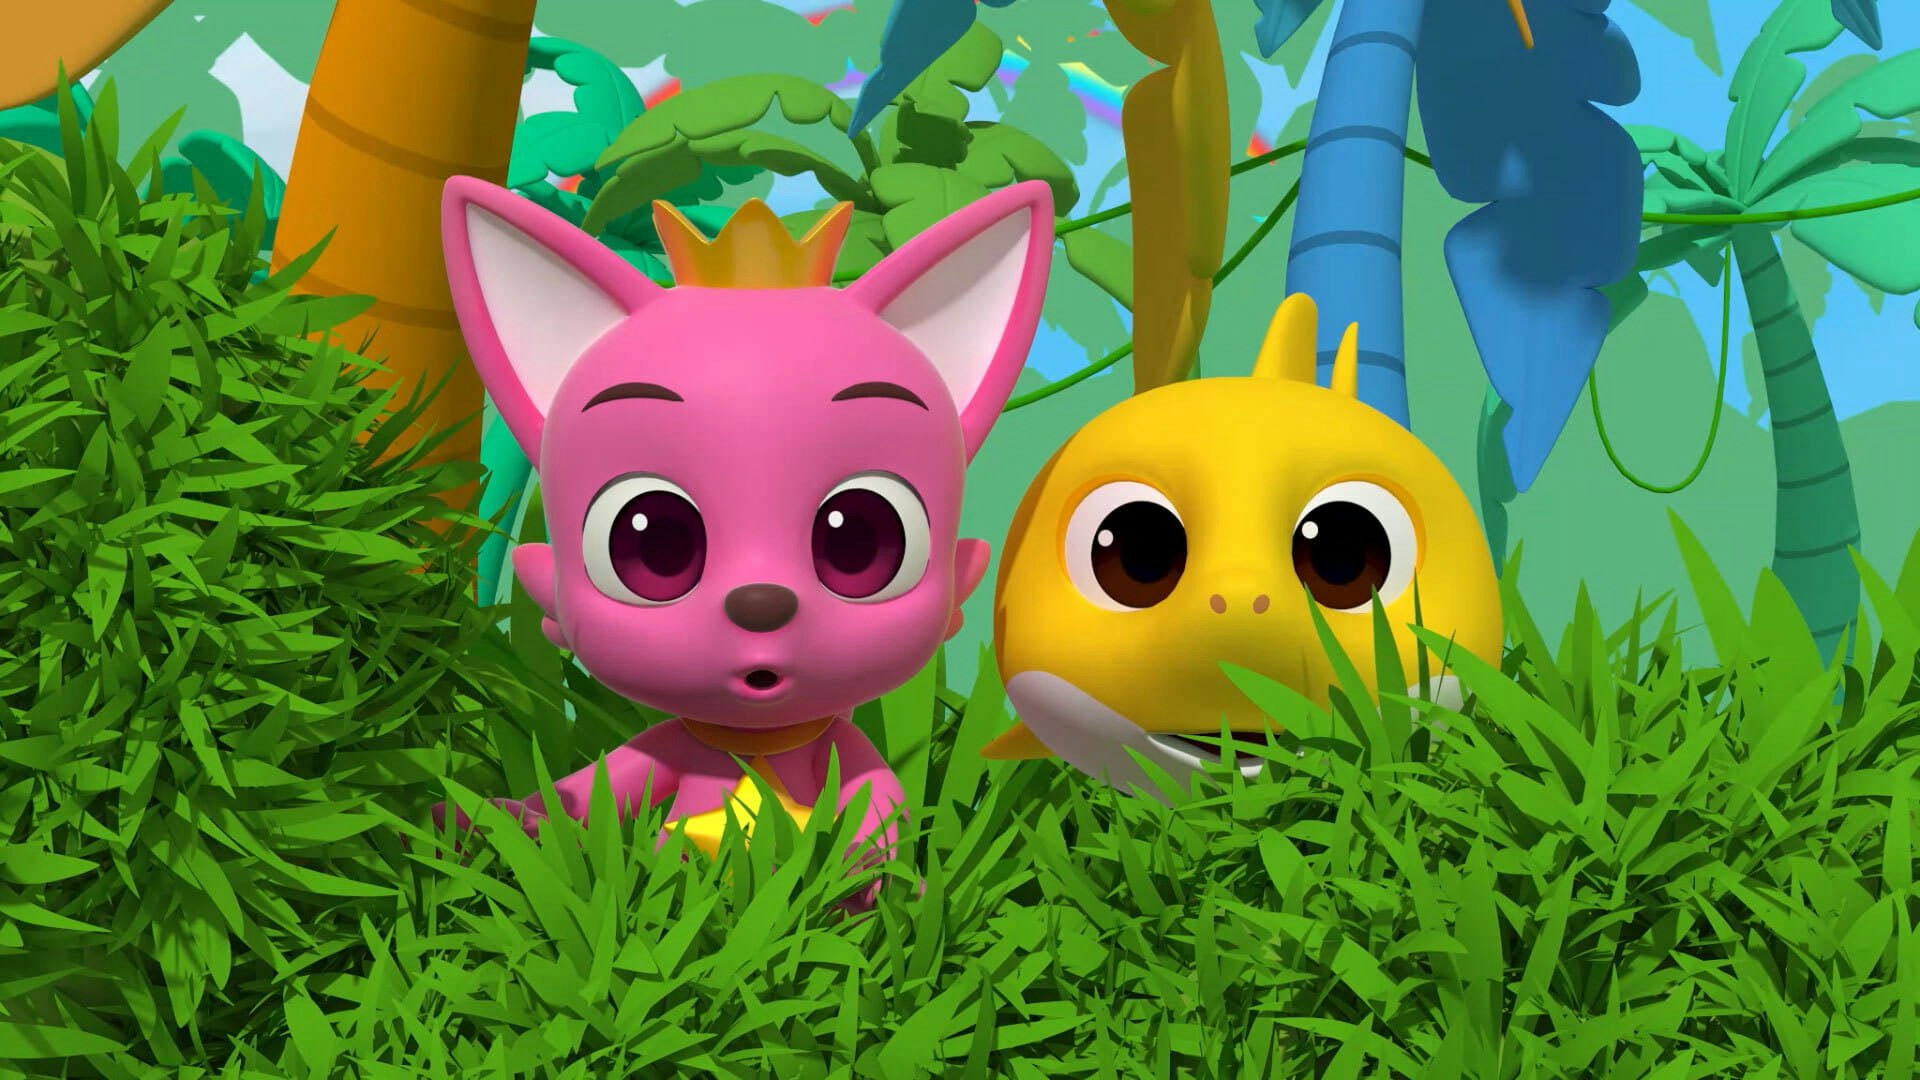 https://img-assets.drafthouse.com/images/shows/pinkfong-baby-sharks-space-adventure/pinkfong_and_babyshark-hero.png?auto=compress&crop=focalpoint&fit=crop&fp-x=0.5191&fp-y=0.0884&h=1080&q=80&w=1920